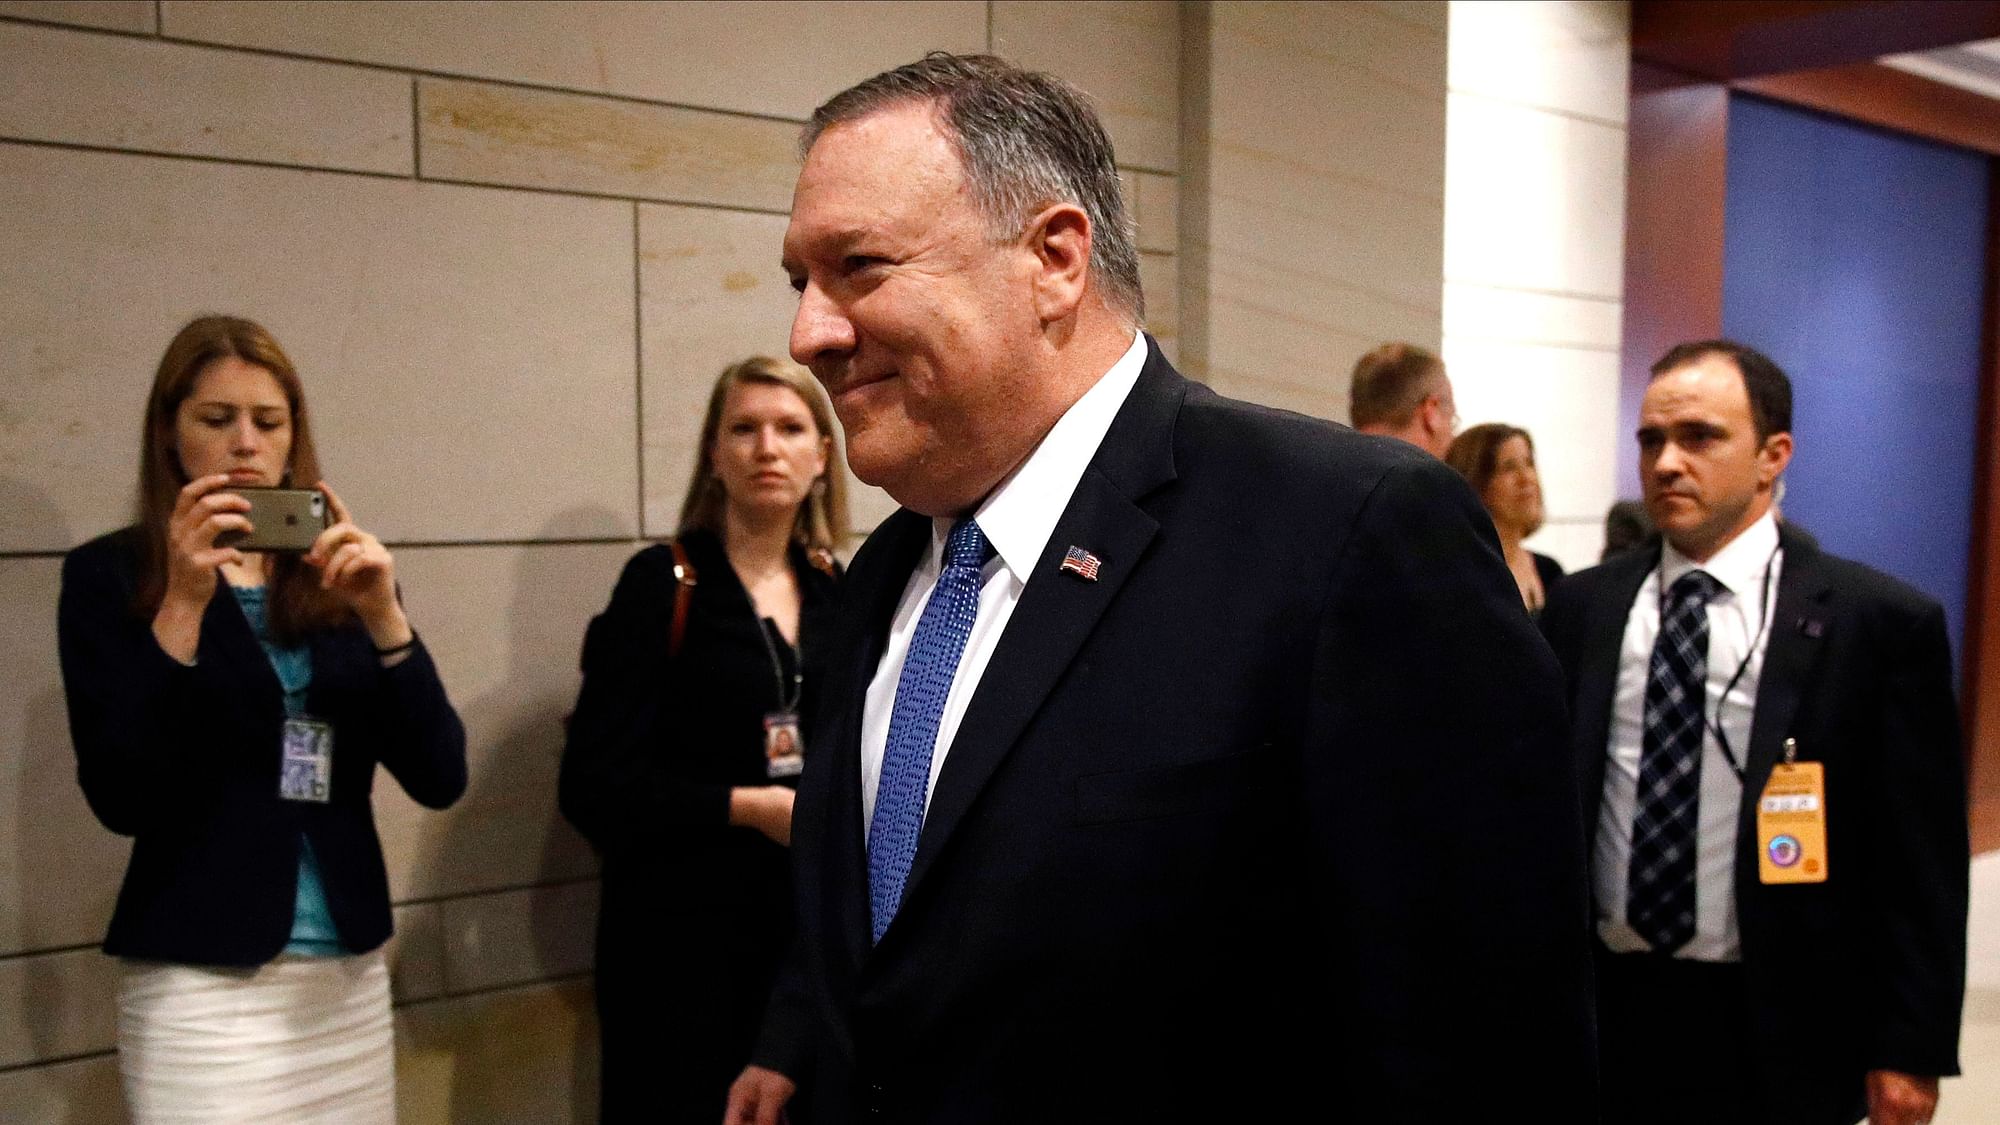 Secretary of State Mike Pompeo arrives at a classified briefing for members of Congress on Iran at Capitol Hill in Washington.